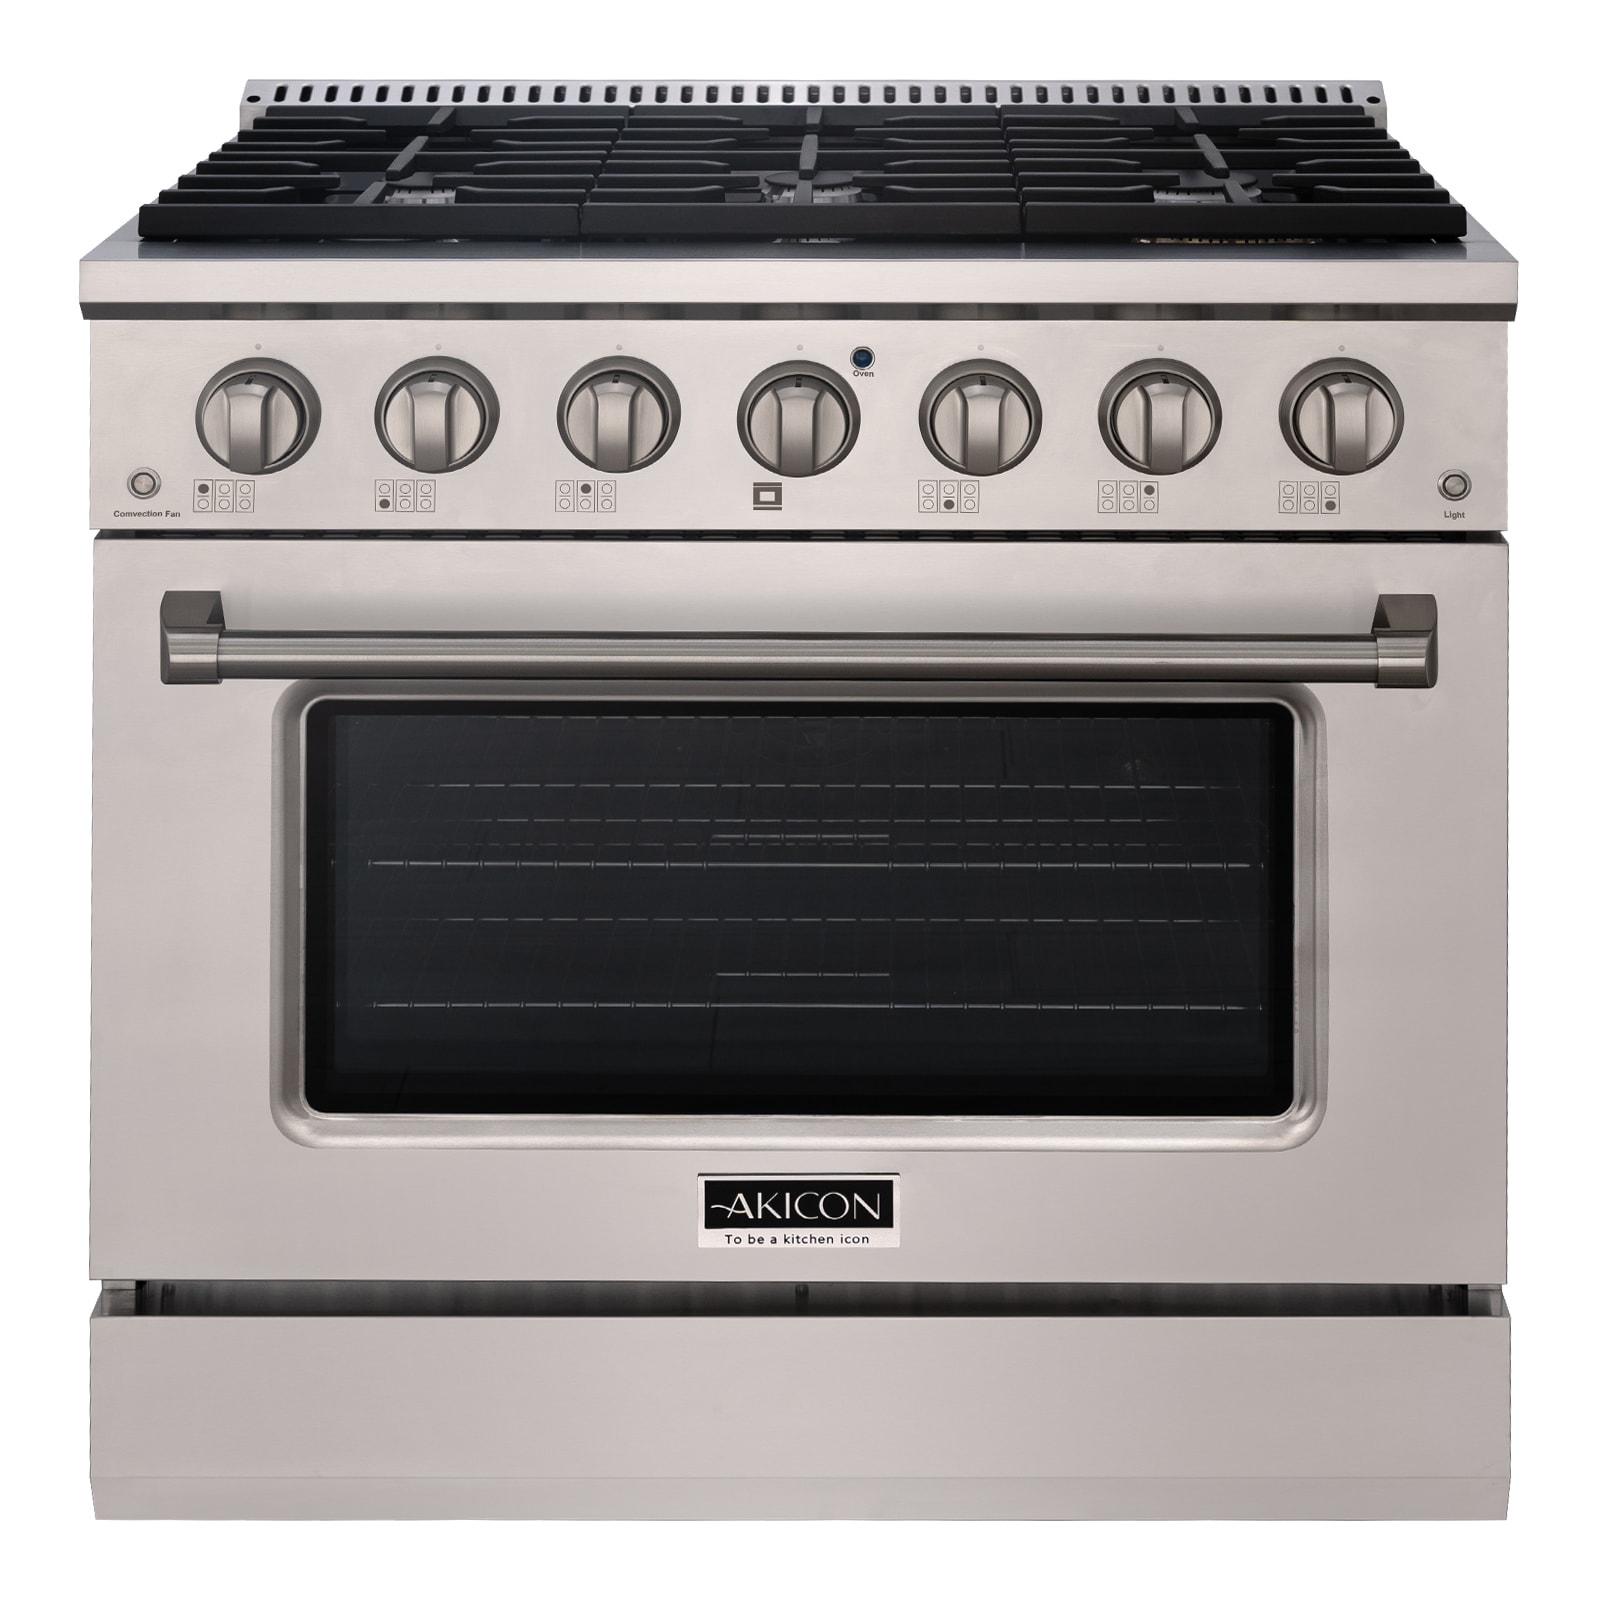 Akicon 36 Slide-in Freestanding Professional Style GAS Range with 5.2 Cu. ft. Oven, 6 Burners, Convection Fan, Cast Iron Grates - Stainless Steel